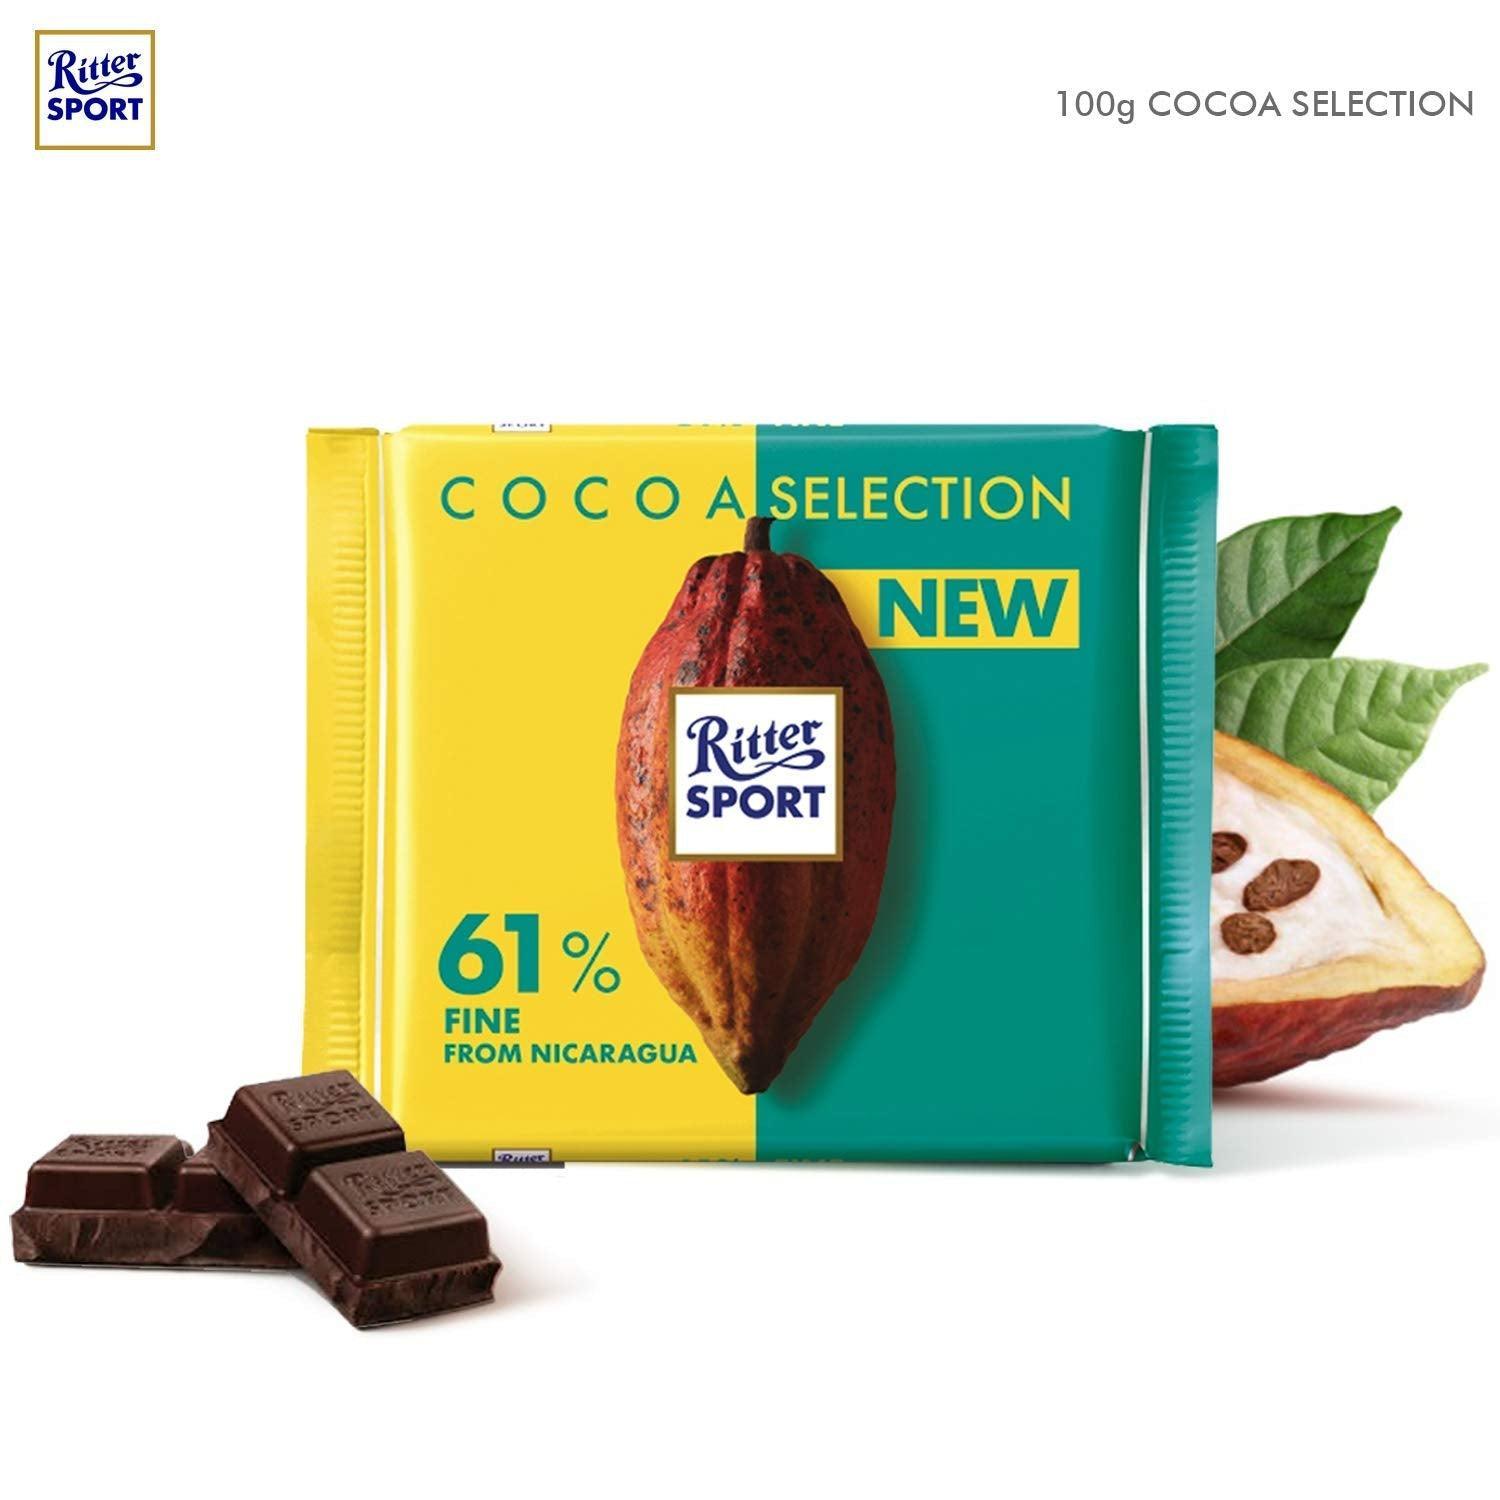 Ritter Sport Cocoa Dark Chocolate with 61% Fine from Nicaragua,100g (Imported) - Super 7 Mart